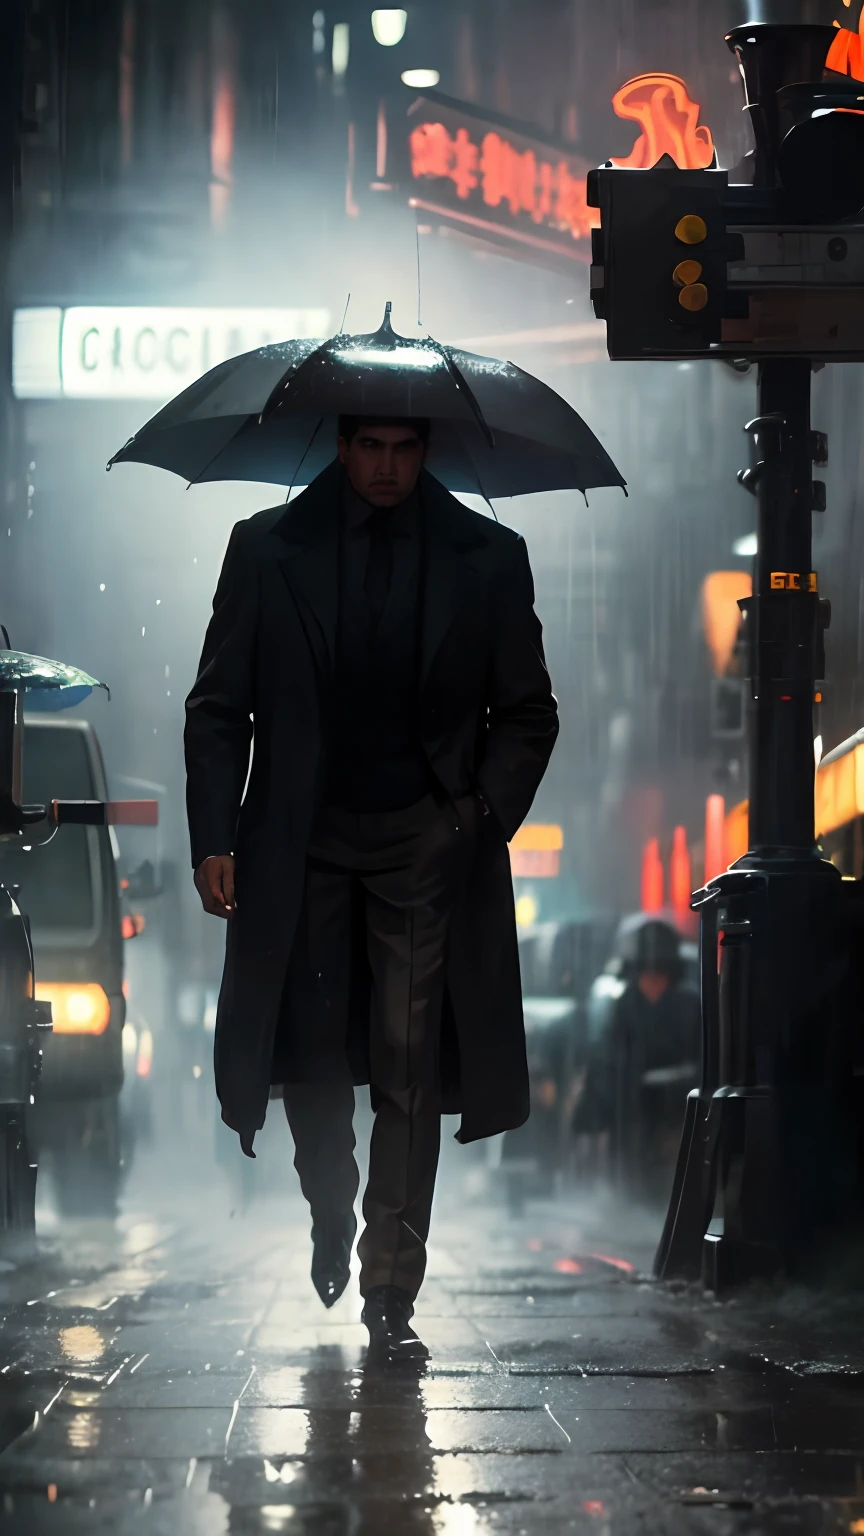 Realistic style, hyper-detailed, highly immersive vertical scene, a well-dressed lone man walking through the rain-slicked streets of London after a downpour, intricate details of the nighttime illumination reflecting off the wet pavement and gas lamps, capturing the essence of solitude in the midst of an urban landscape, the image was taken with a high-resolution camera that brings every nuance of the setting to life, 8k, HDR